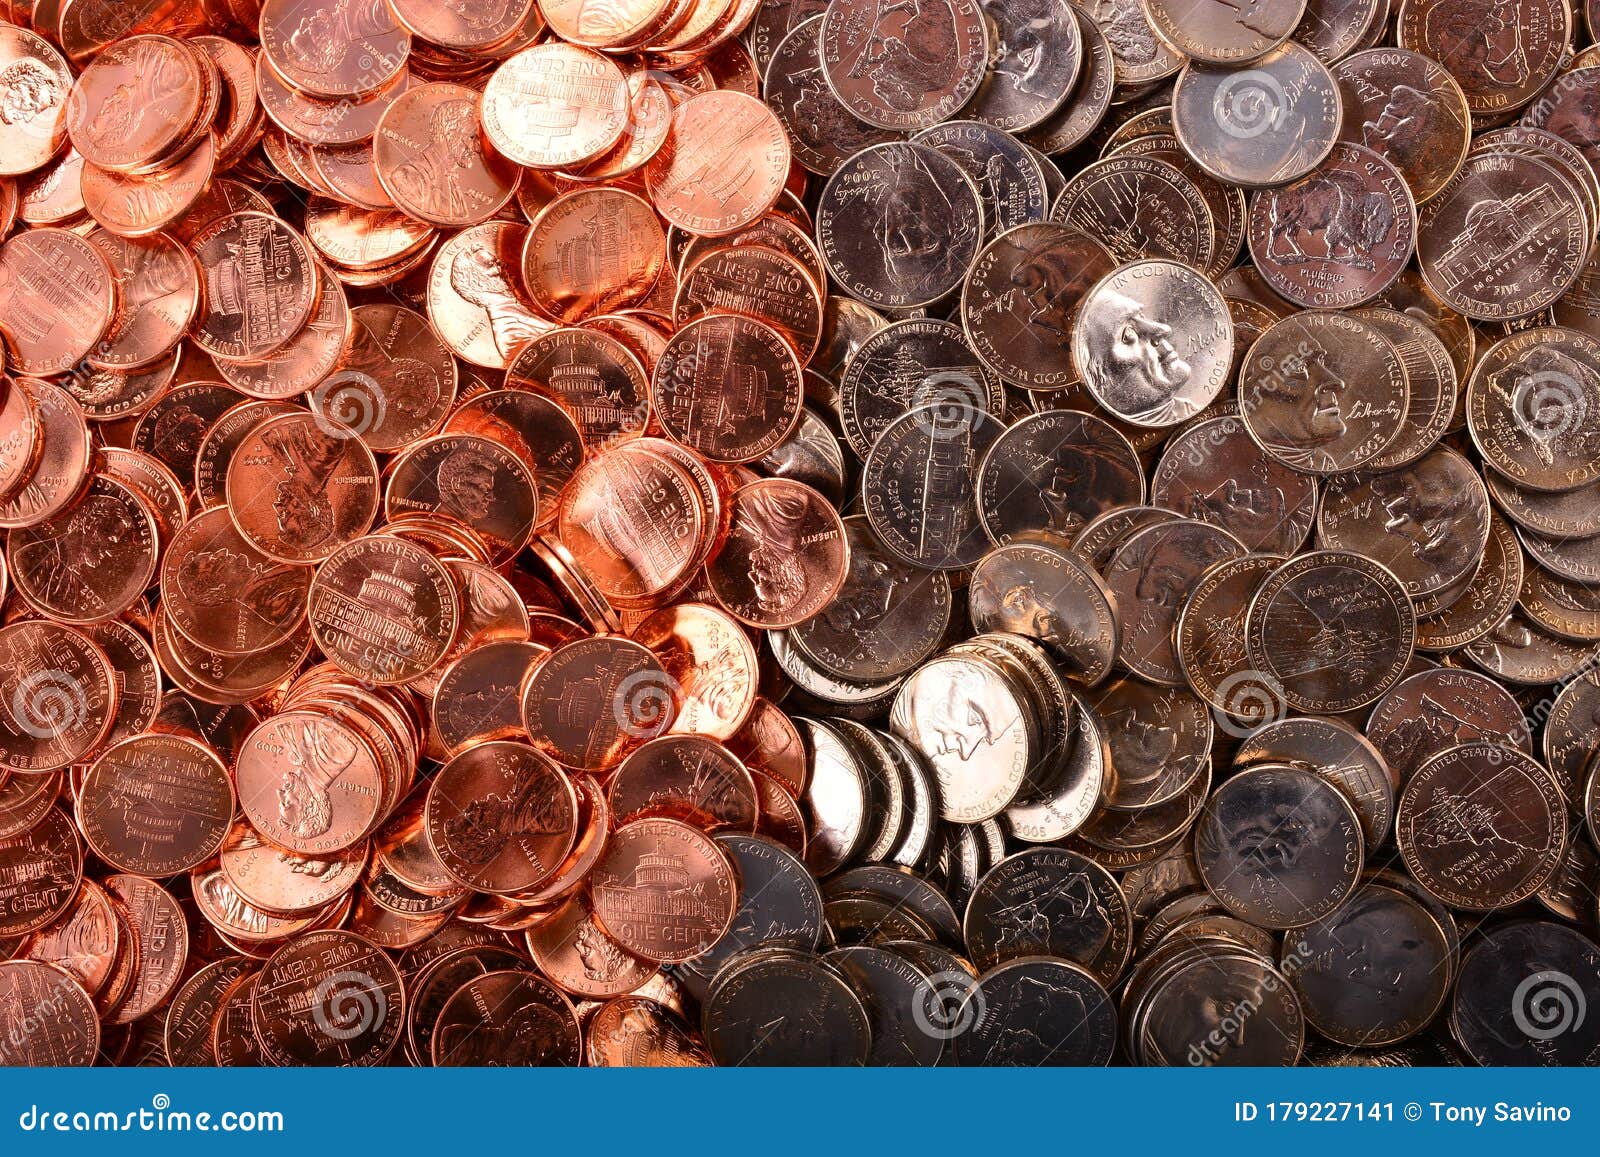 numismatic background of uncirculated cents and nickels